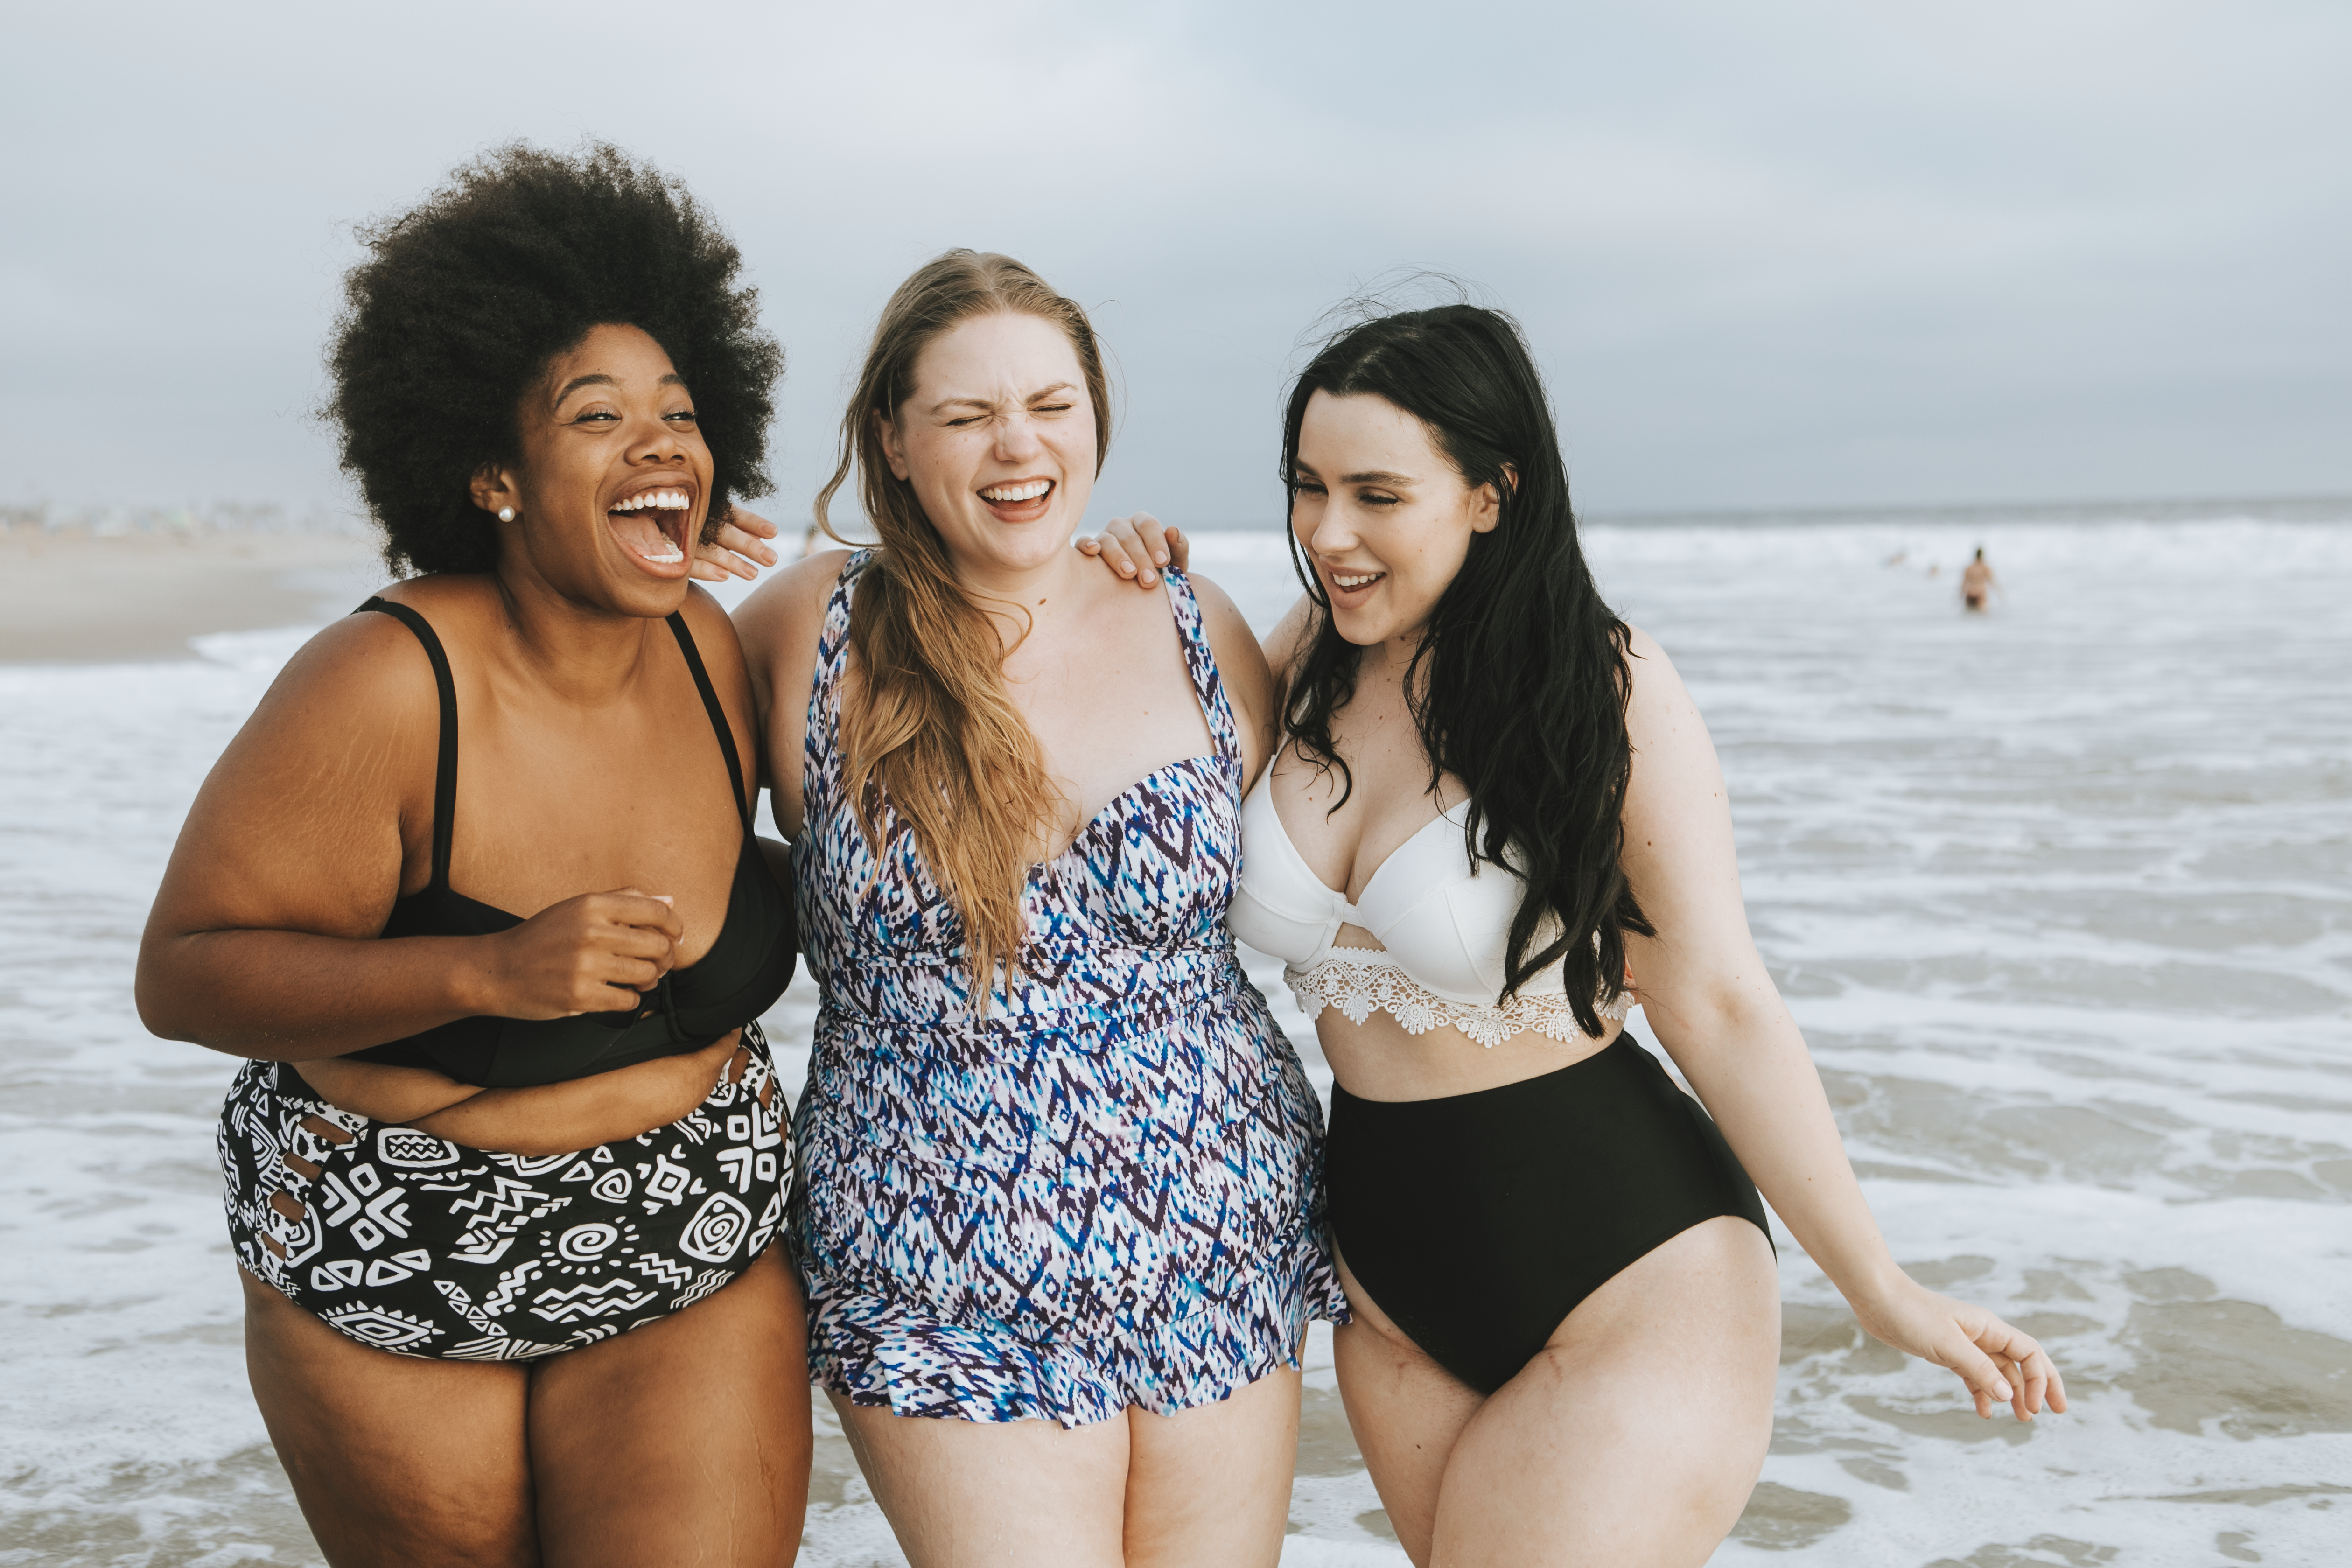 The Dating App for Curvy People to Enjoy Dating & Find Love